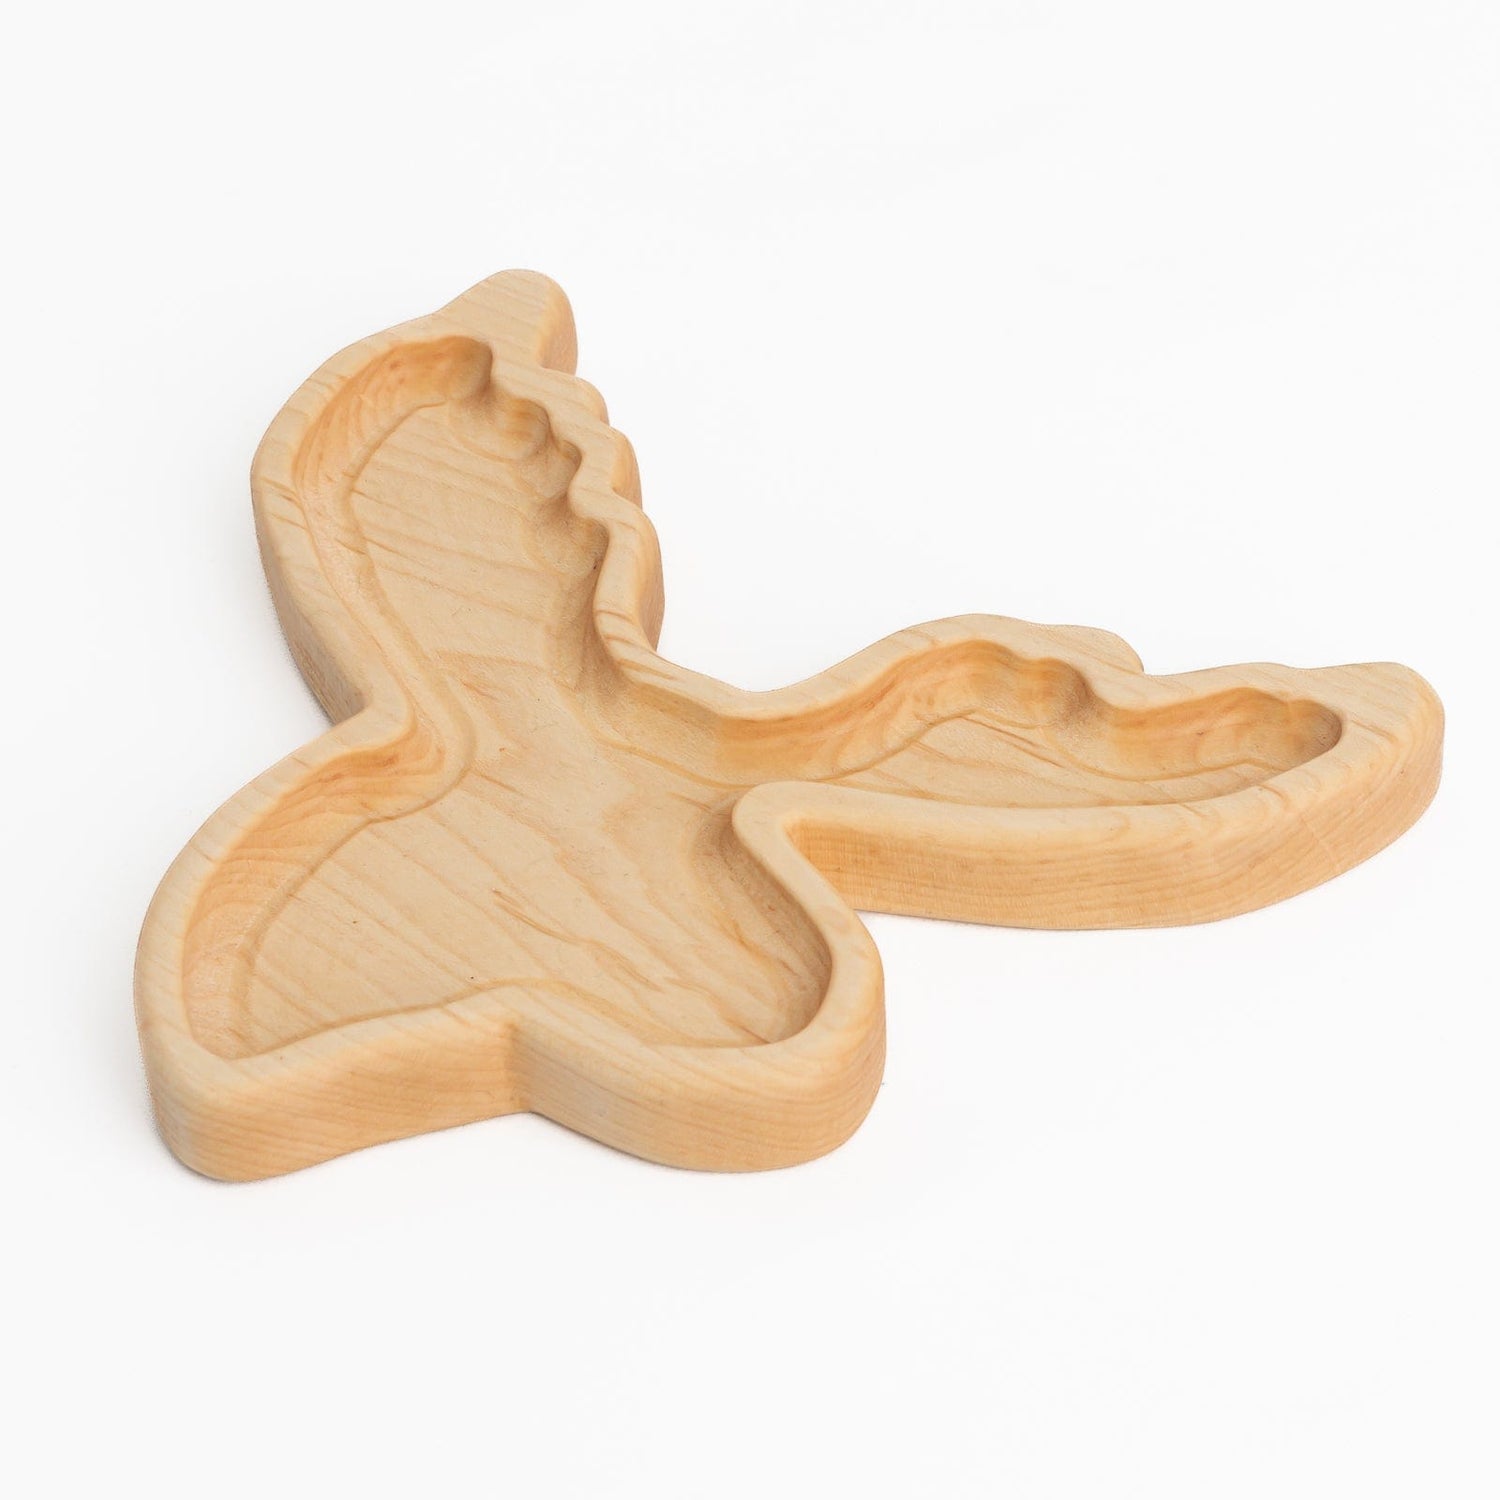 Aw & Co. Sensory Play Wooden Moose Plate / Sensory Tray (Made in Canada)